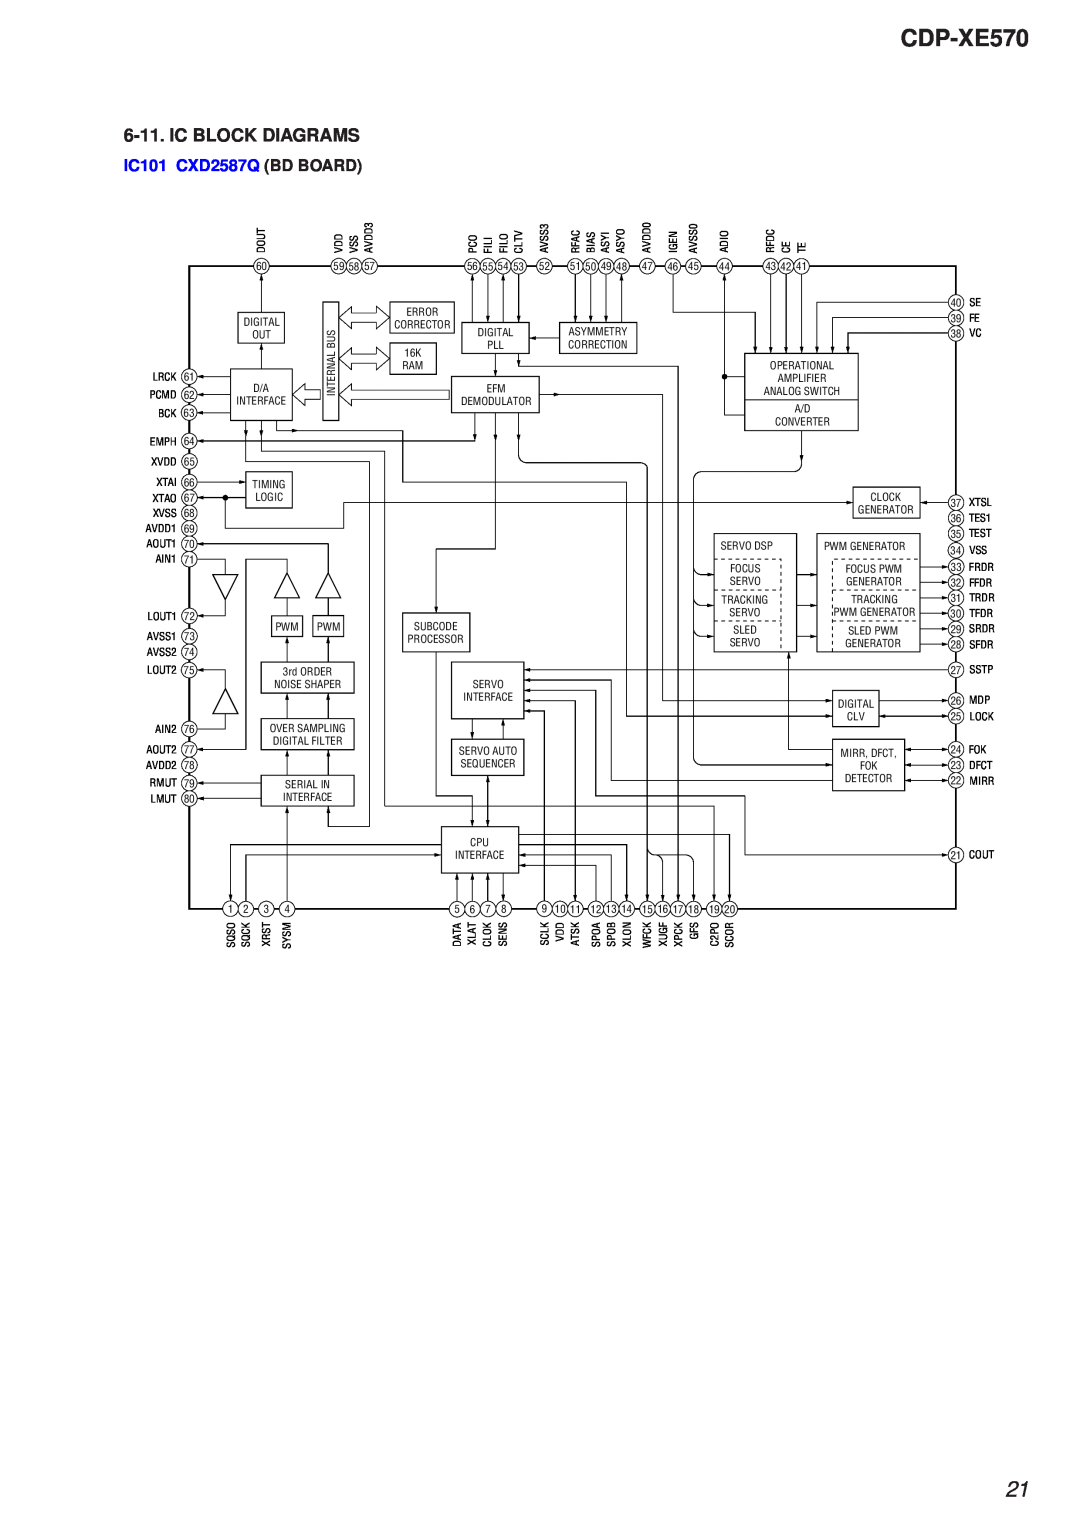 Sony Ericsson CDP-XE570 specifications Ic Block Diagrams, IC101 CXD2587Q BD BOARD 